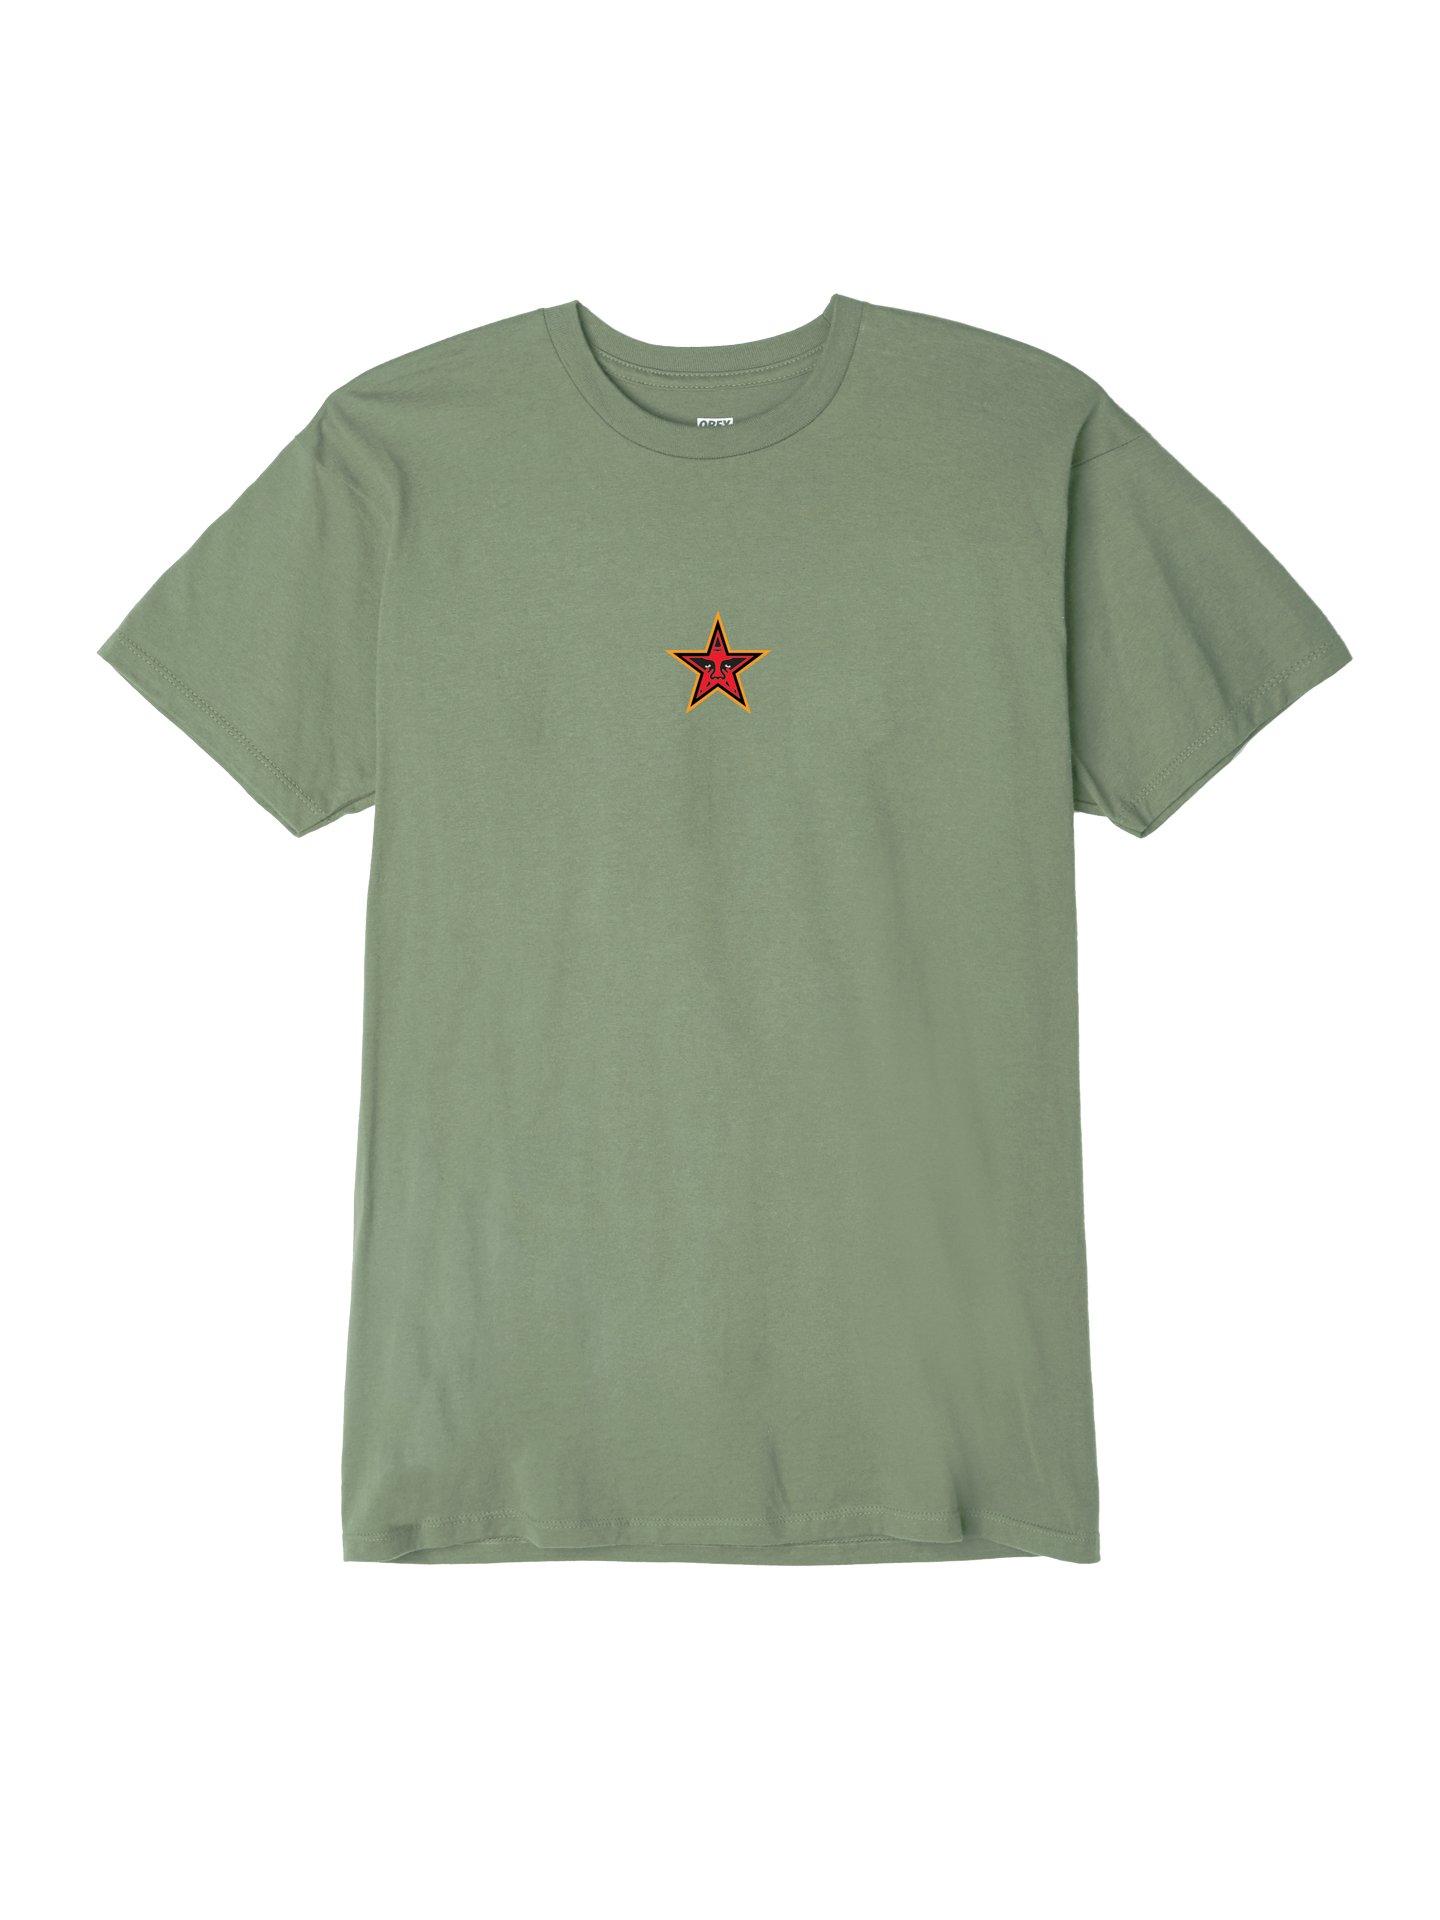 Obey Star Logo - OBEY Star Face Basic Tee